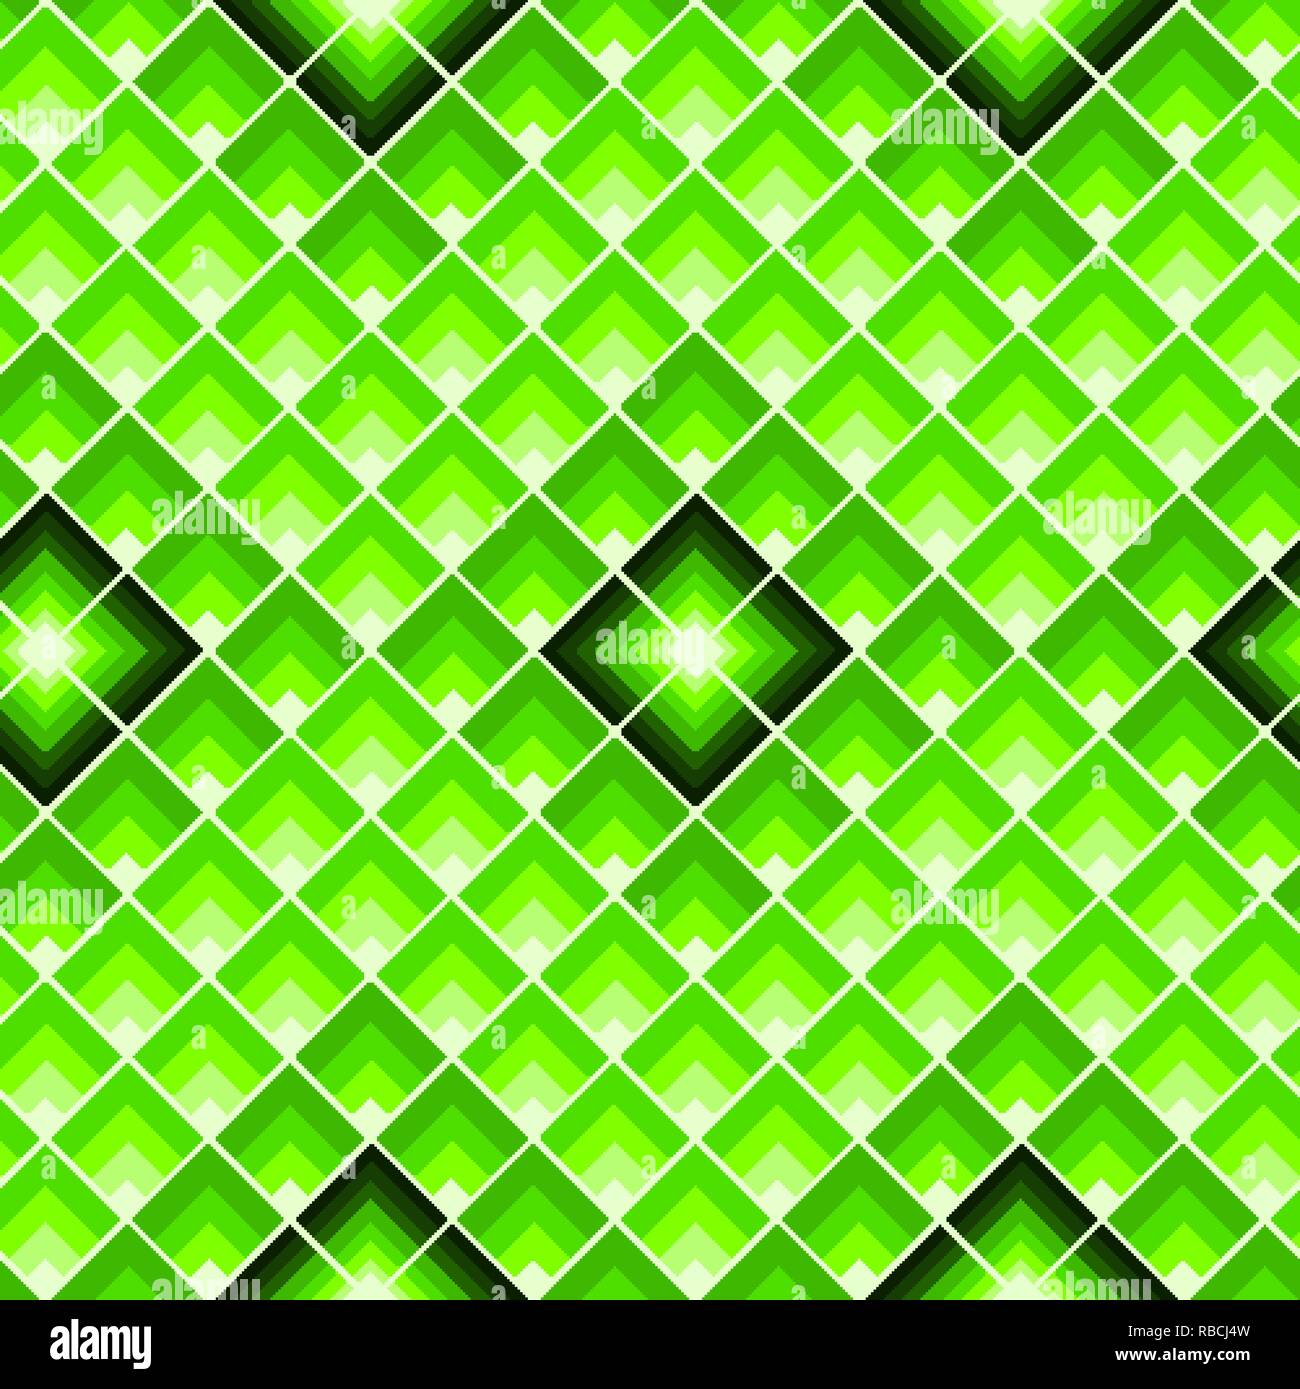 Rectangles or lozenges seamless pattern in trendy neon lime color Stock Vector